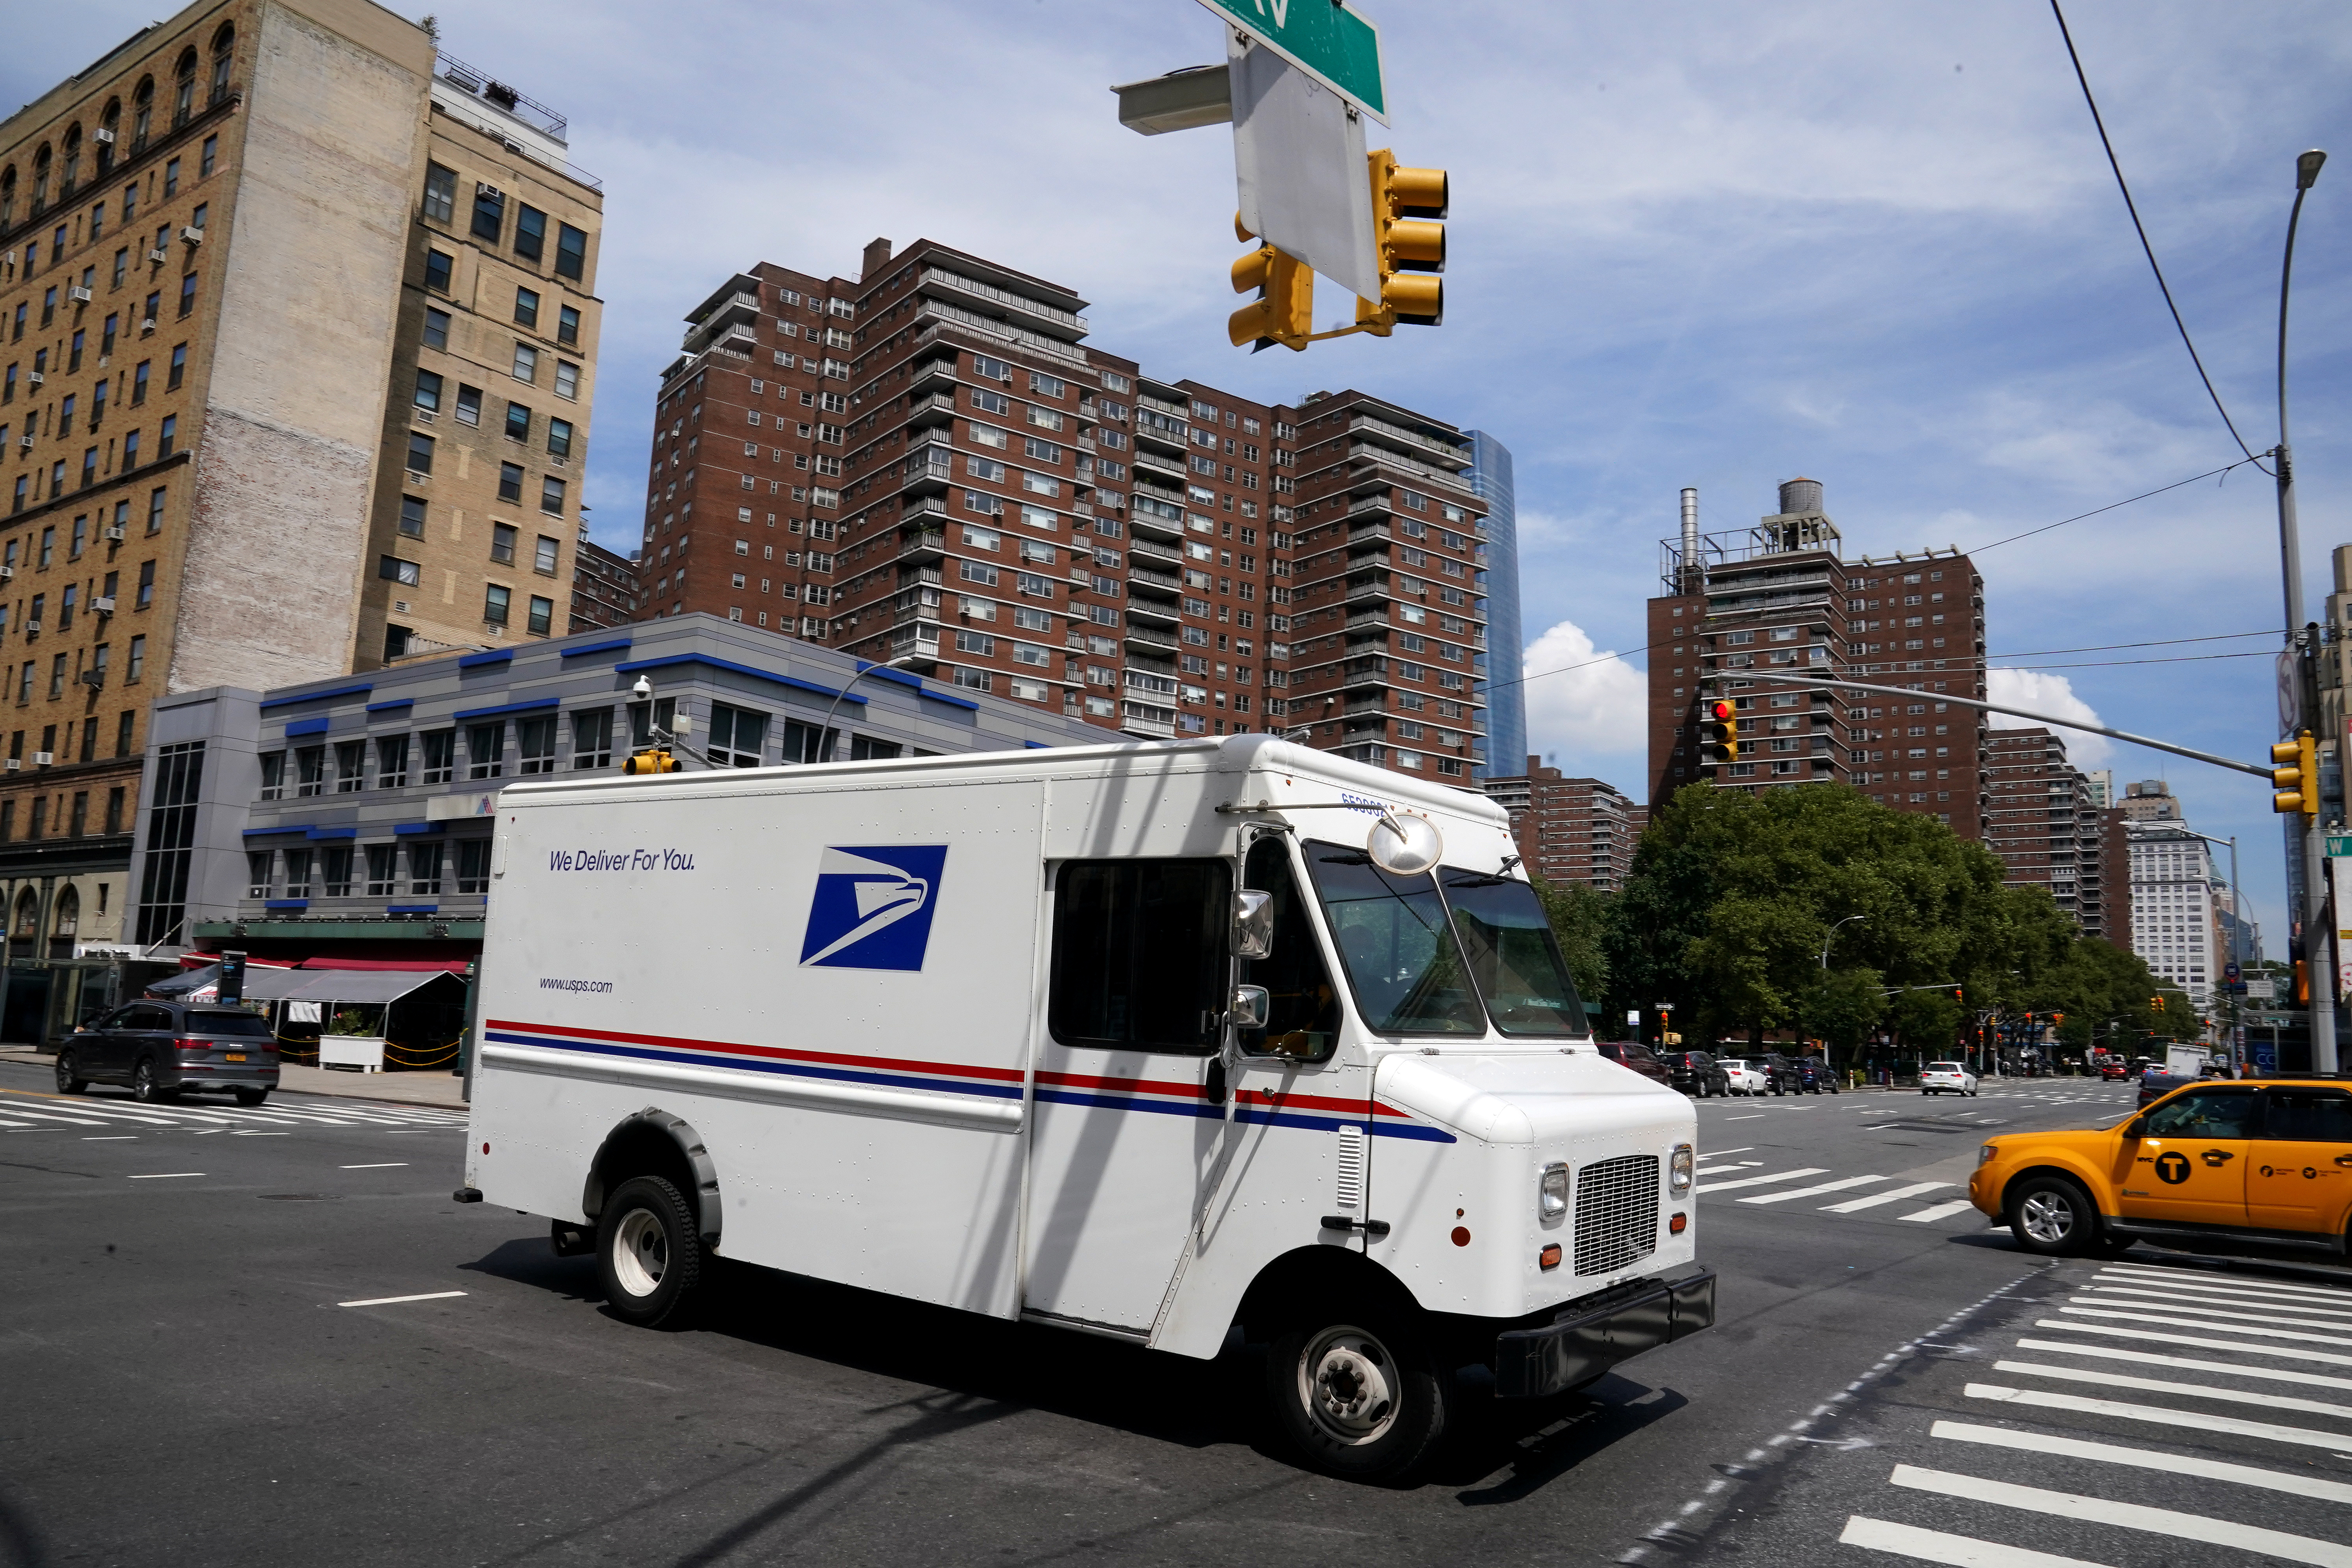 A U.S. Postal Service (USPS) truck is pictured